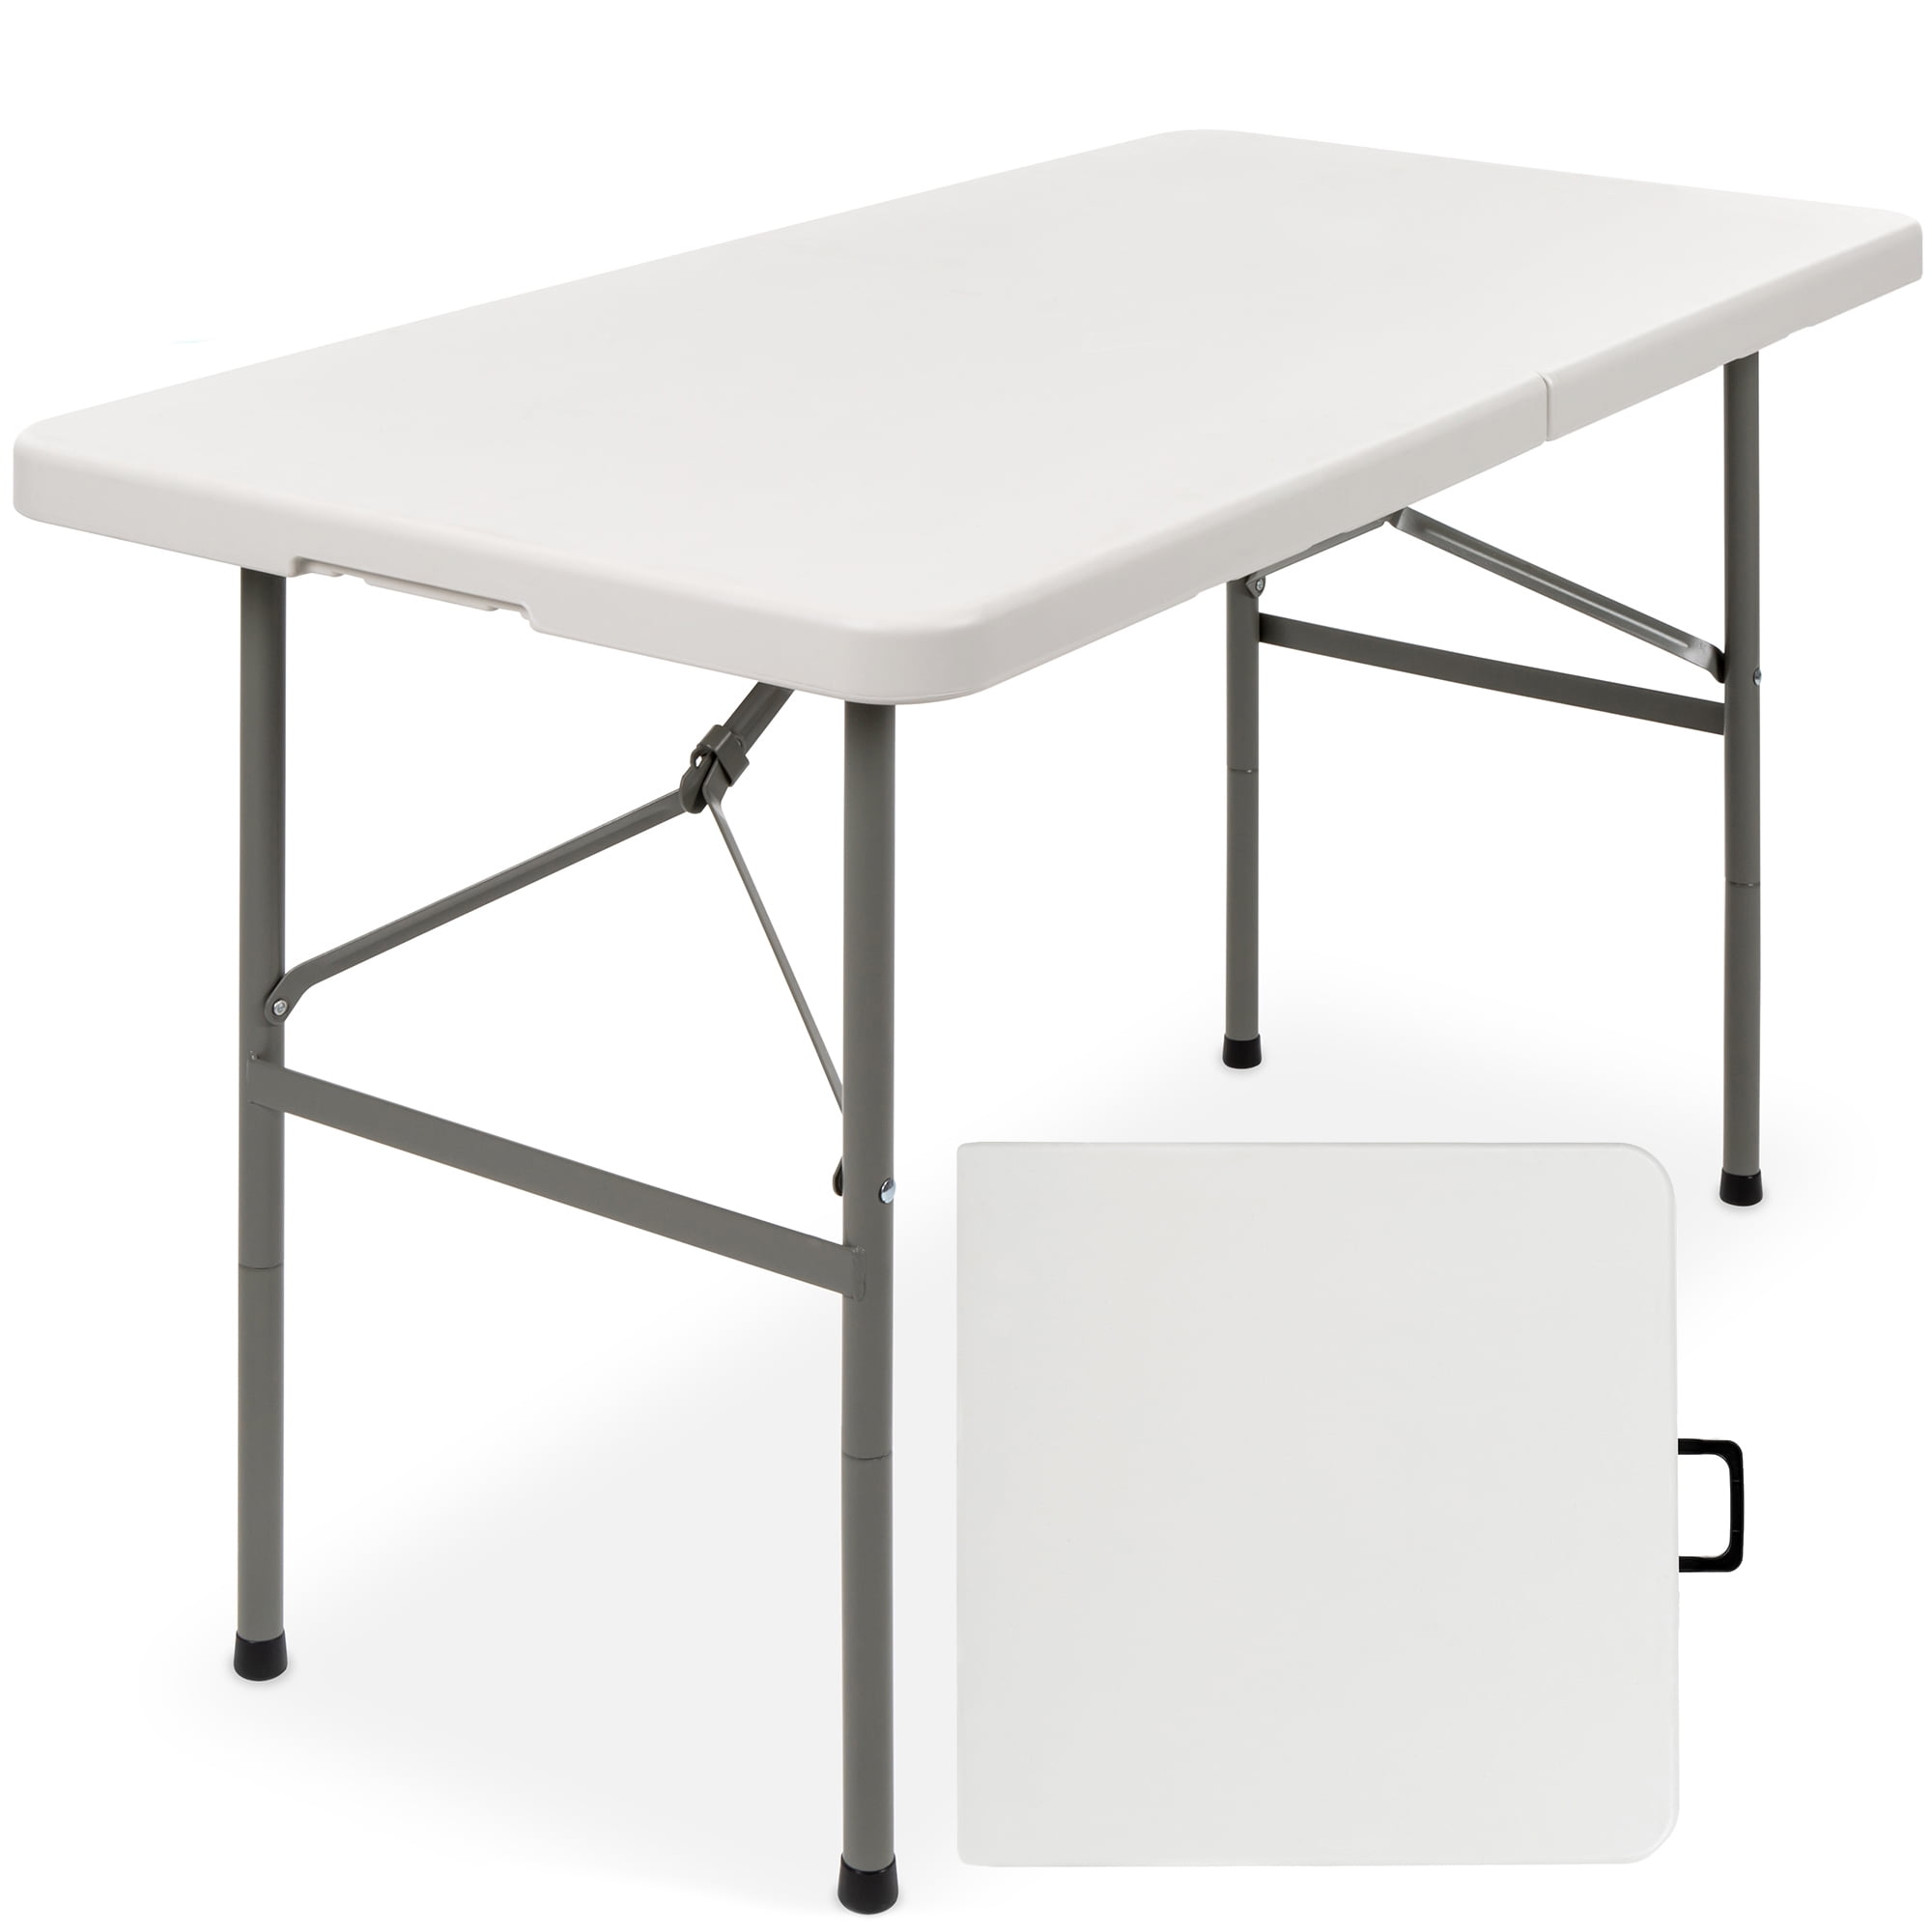 6 ft Plastic Folding Table for Picnics New Home Era Fold Up Table Outdoor Table with Carrying Handle Lightweight and Durable Camping Bi-Fold Rectangular Design Parties